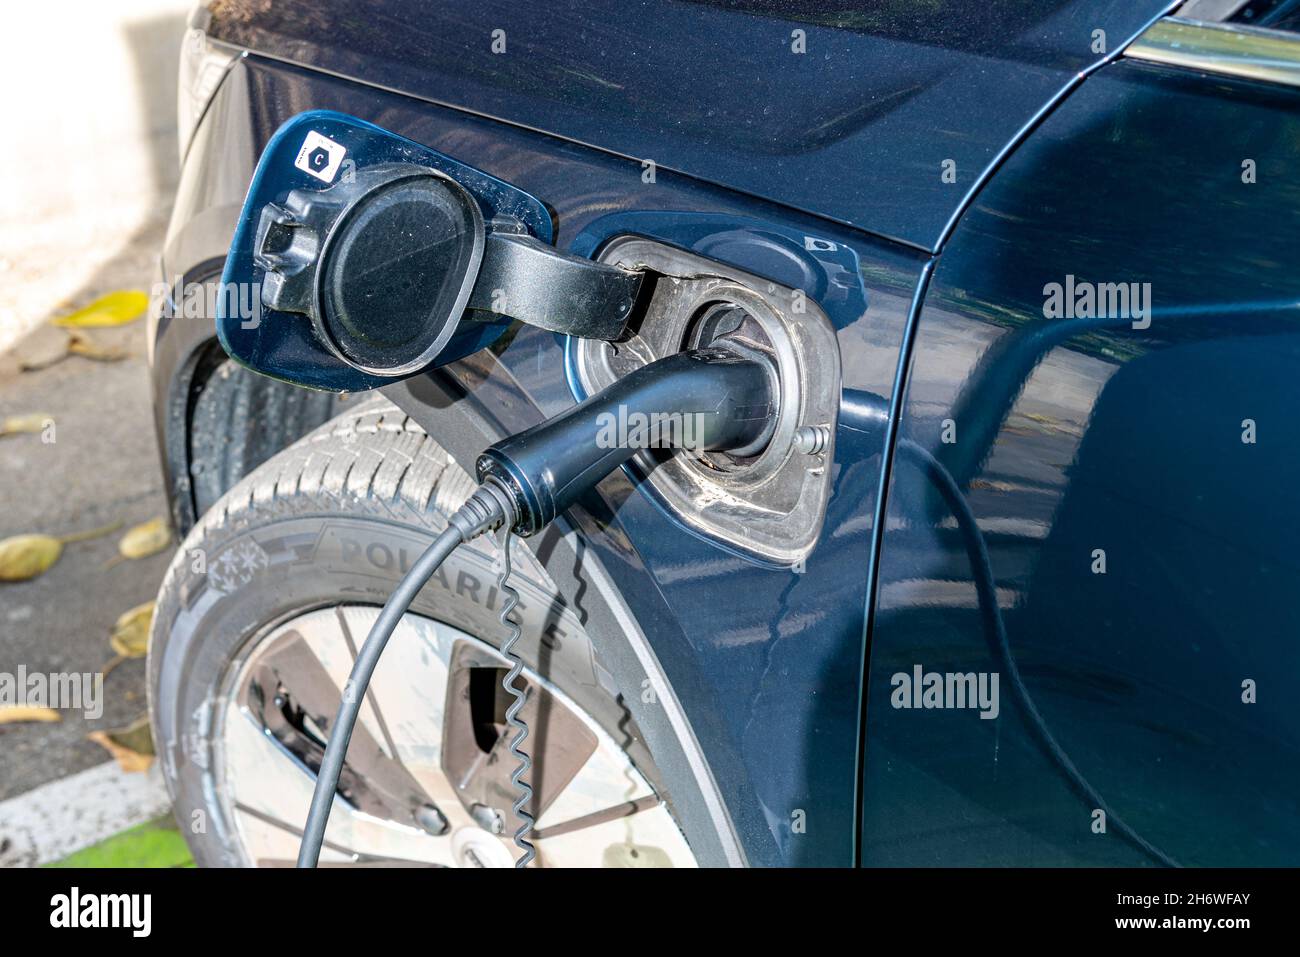 Bra, Cuneo, Piedmont, Italy - October 28, 2021: car in charge at the Electric Car Charging Station Stock Photo